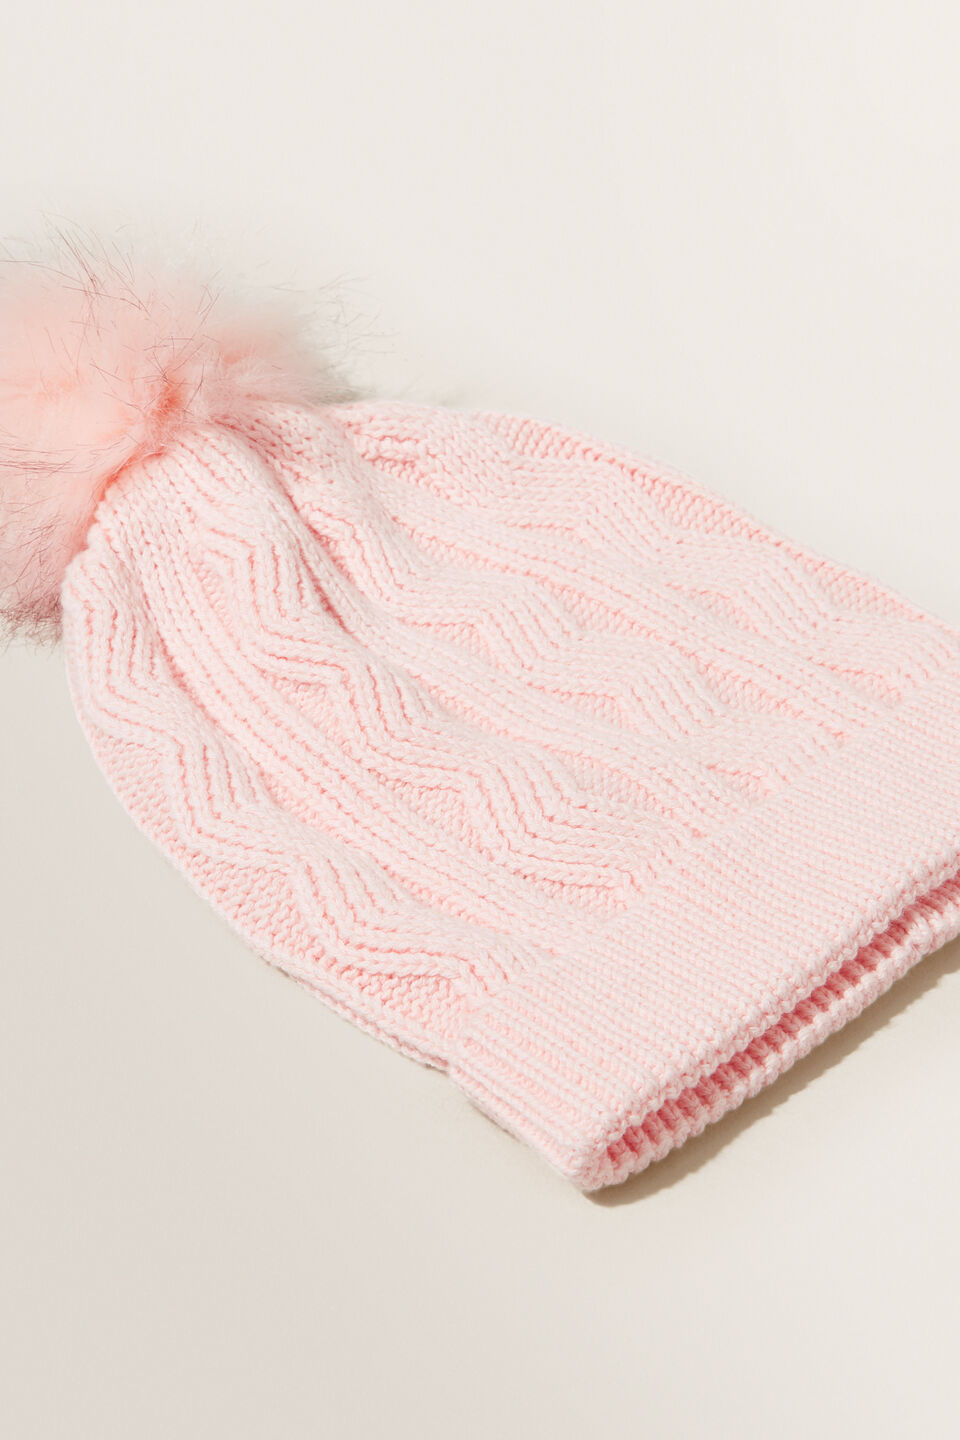 Cable Beanie  Dusty Rose  hi-res